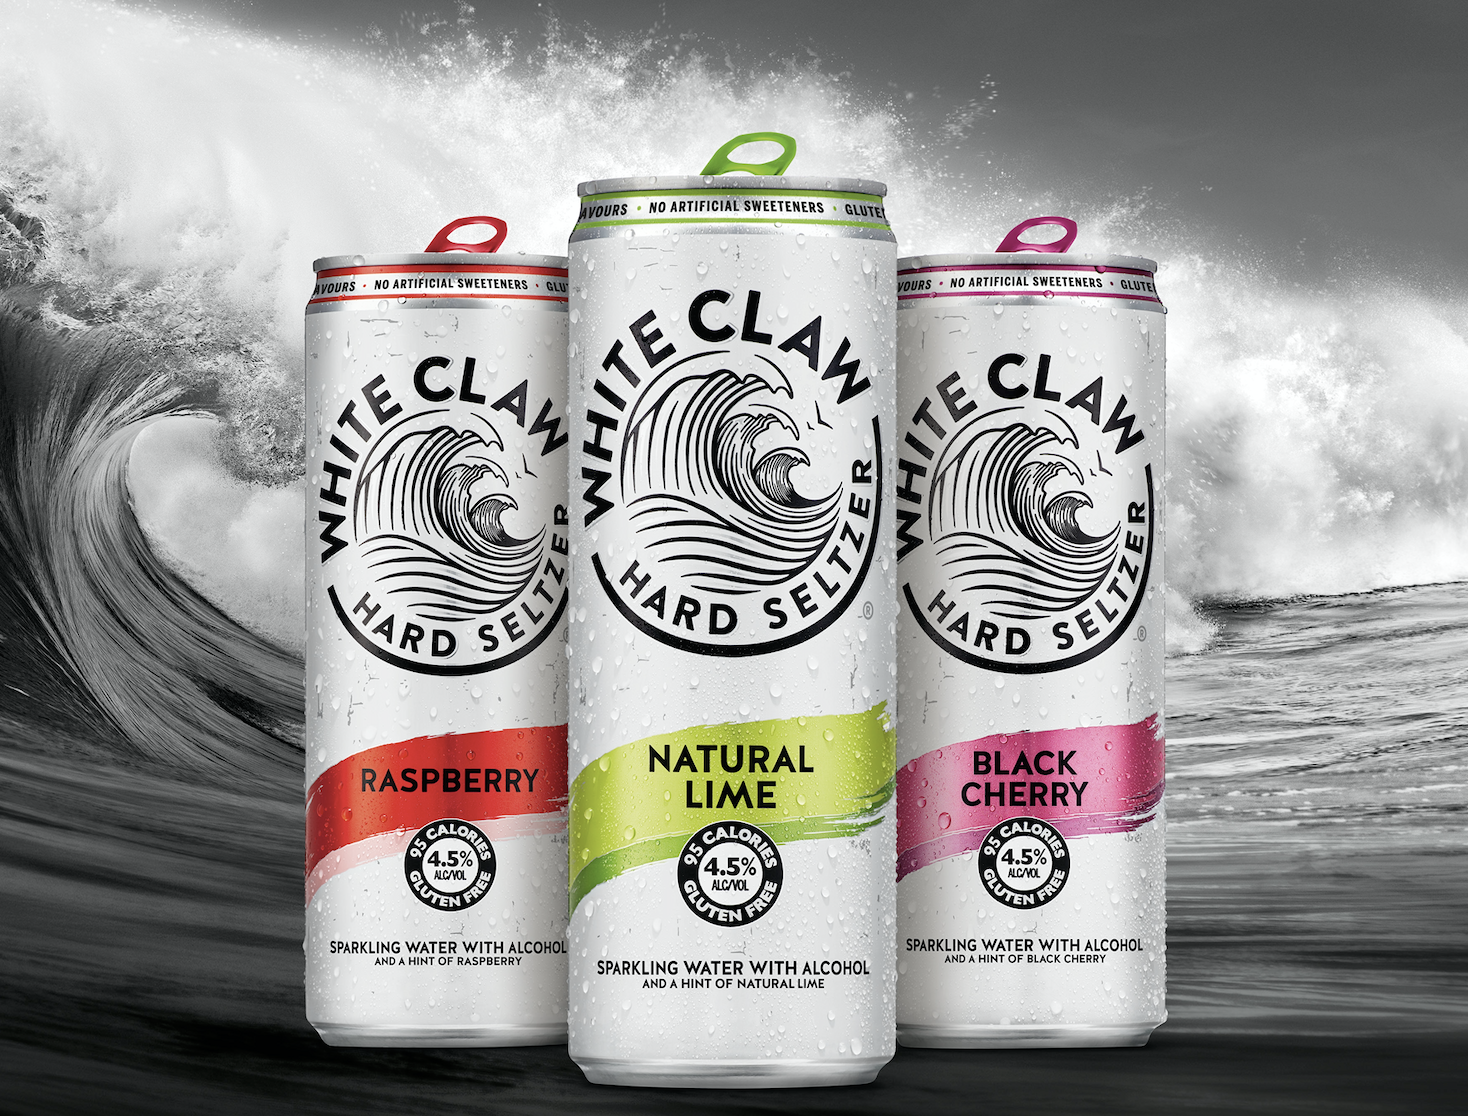 Three cans of White Claw Hard Seltzer against an image of a wave